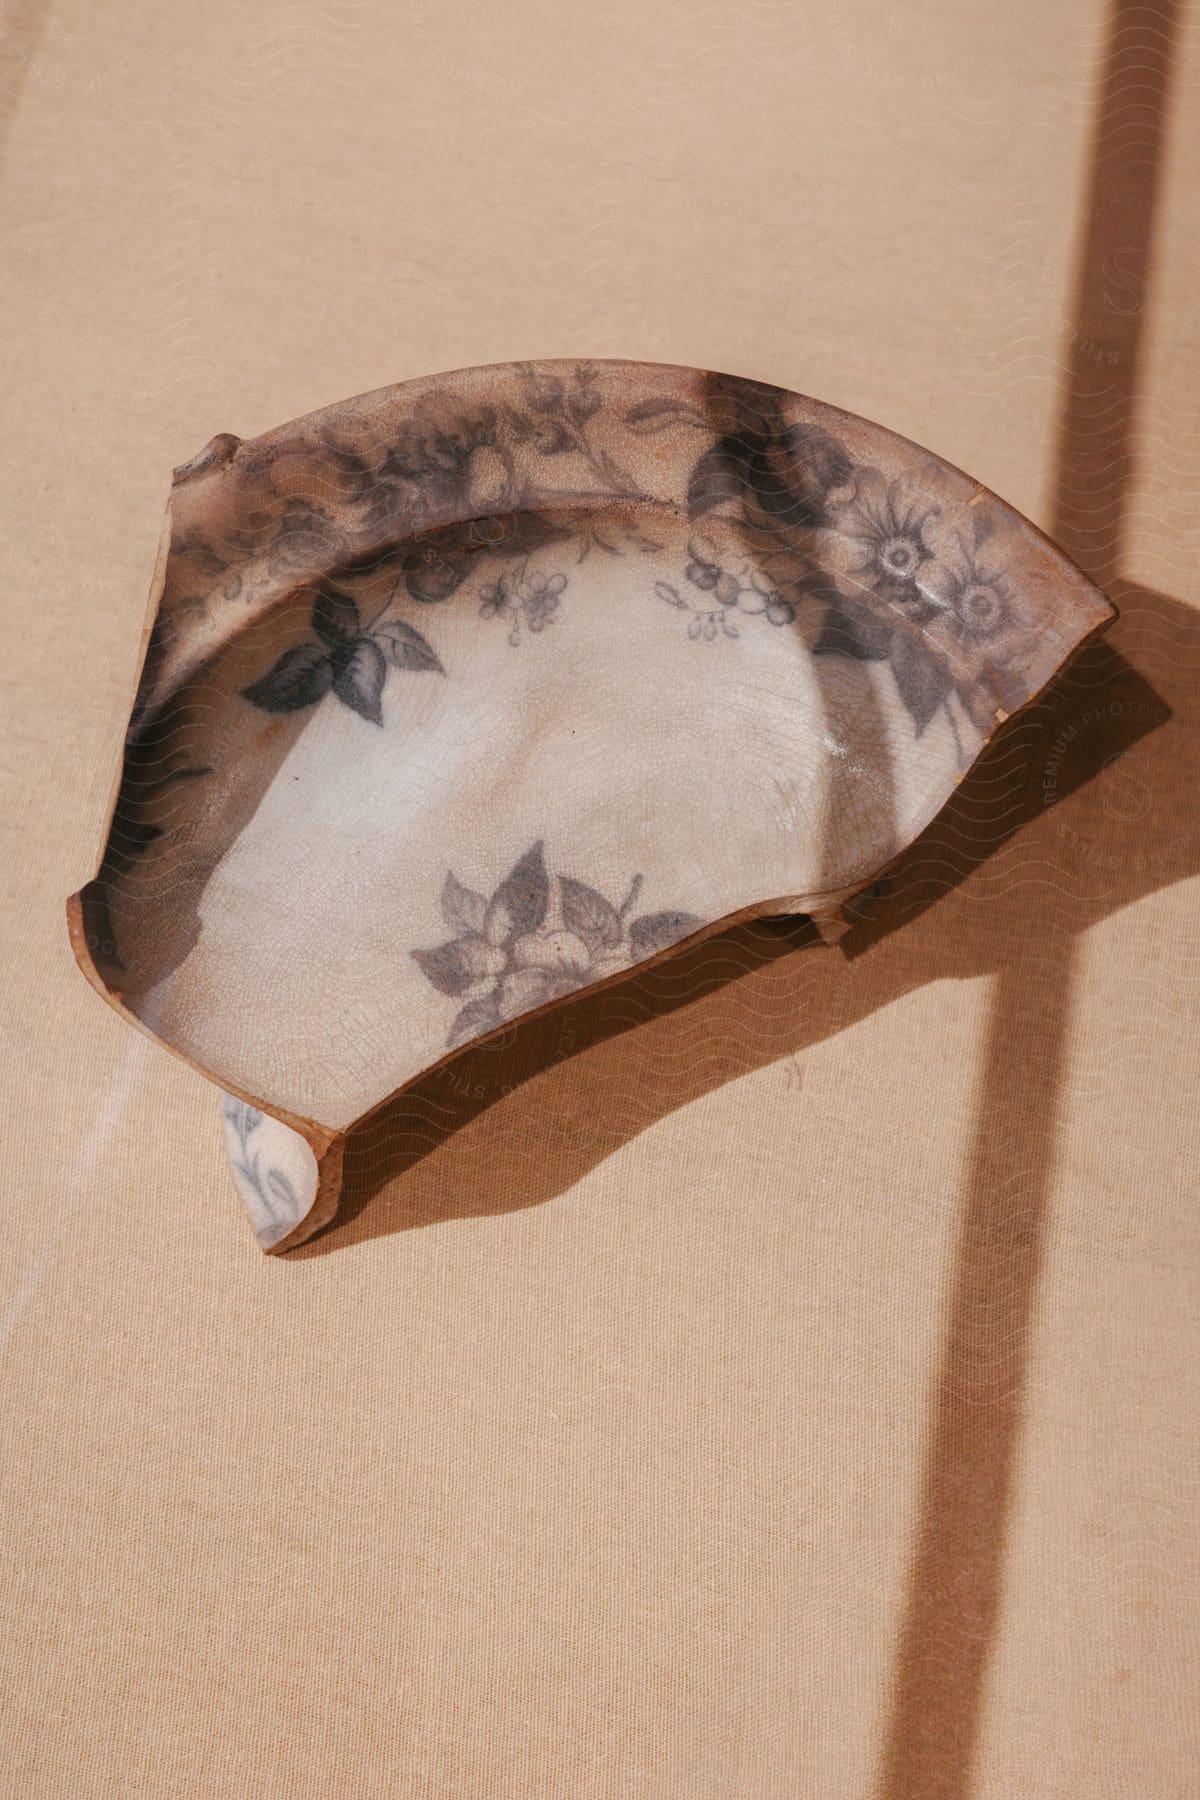 A broken ancient plate sitting on a table as decor